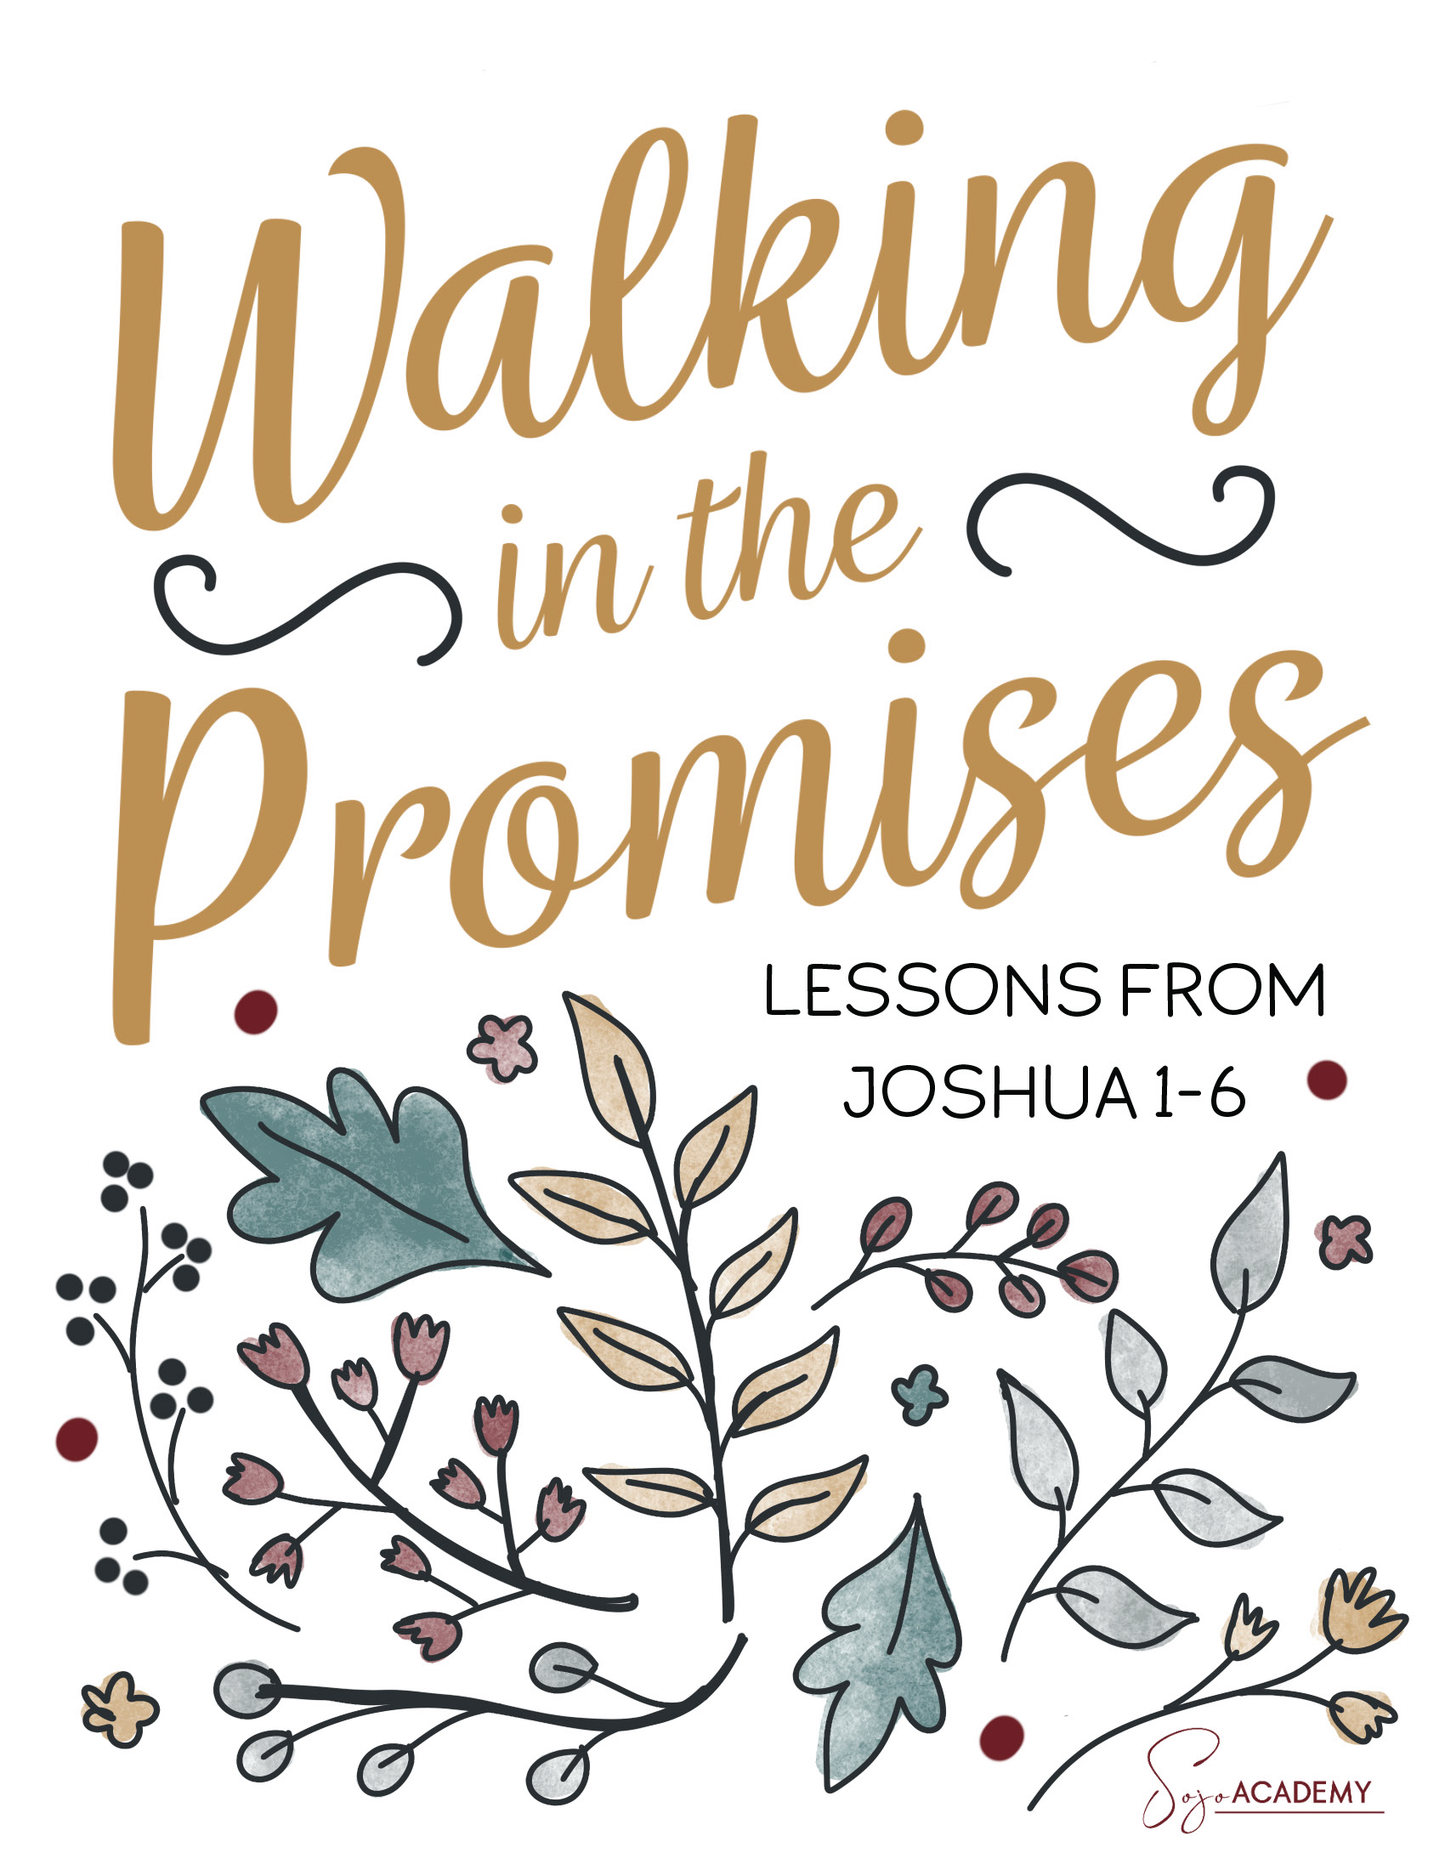 Walking in the Promises: Lessons from Joshua 1-6